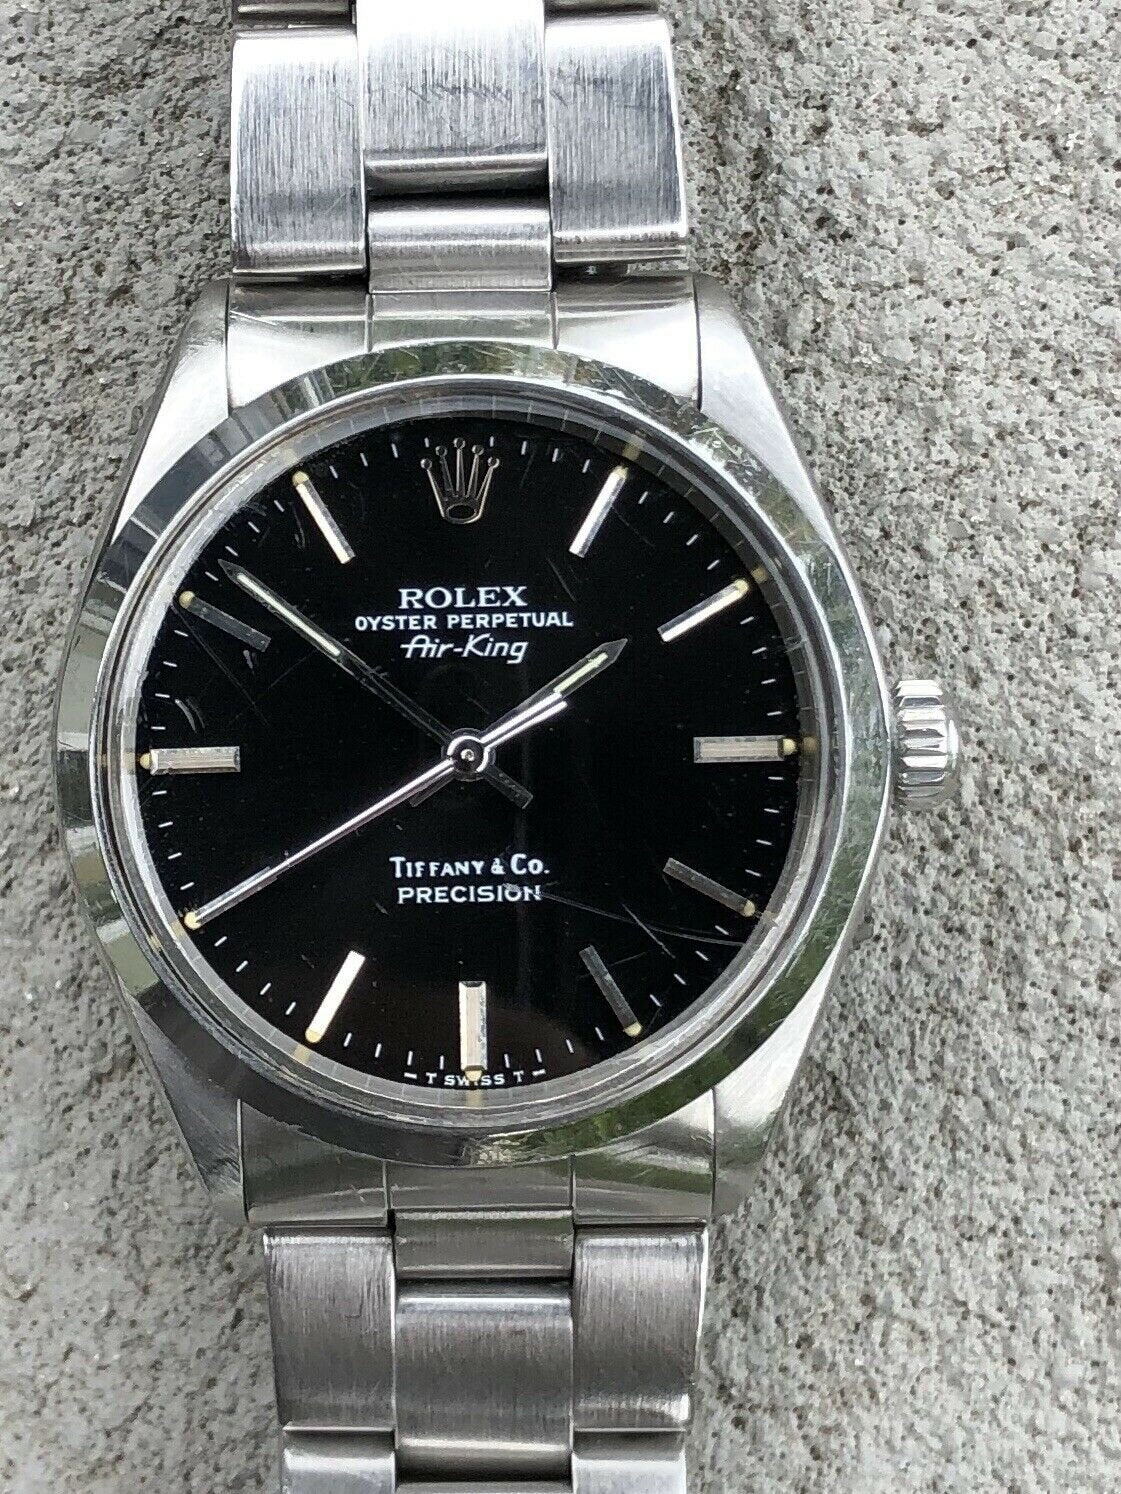 Rolex_Oyster_Perpetual_Air-King_5500_27Tiffany_co-signed_27_-_1979_Watch_Vault_281_29.jpg